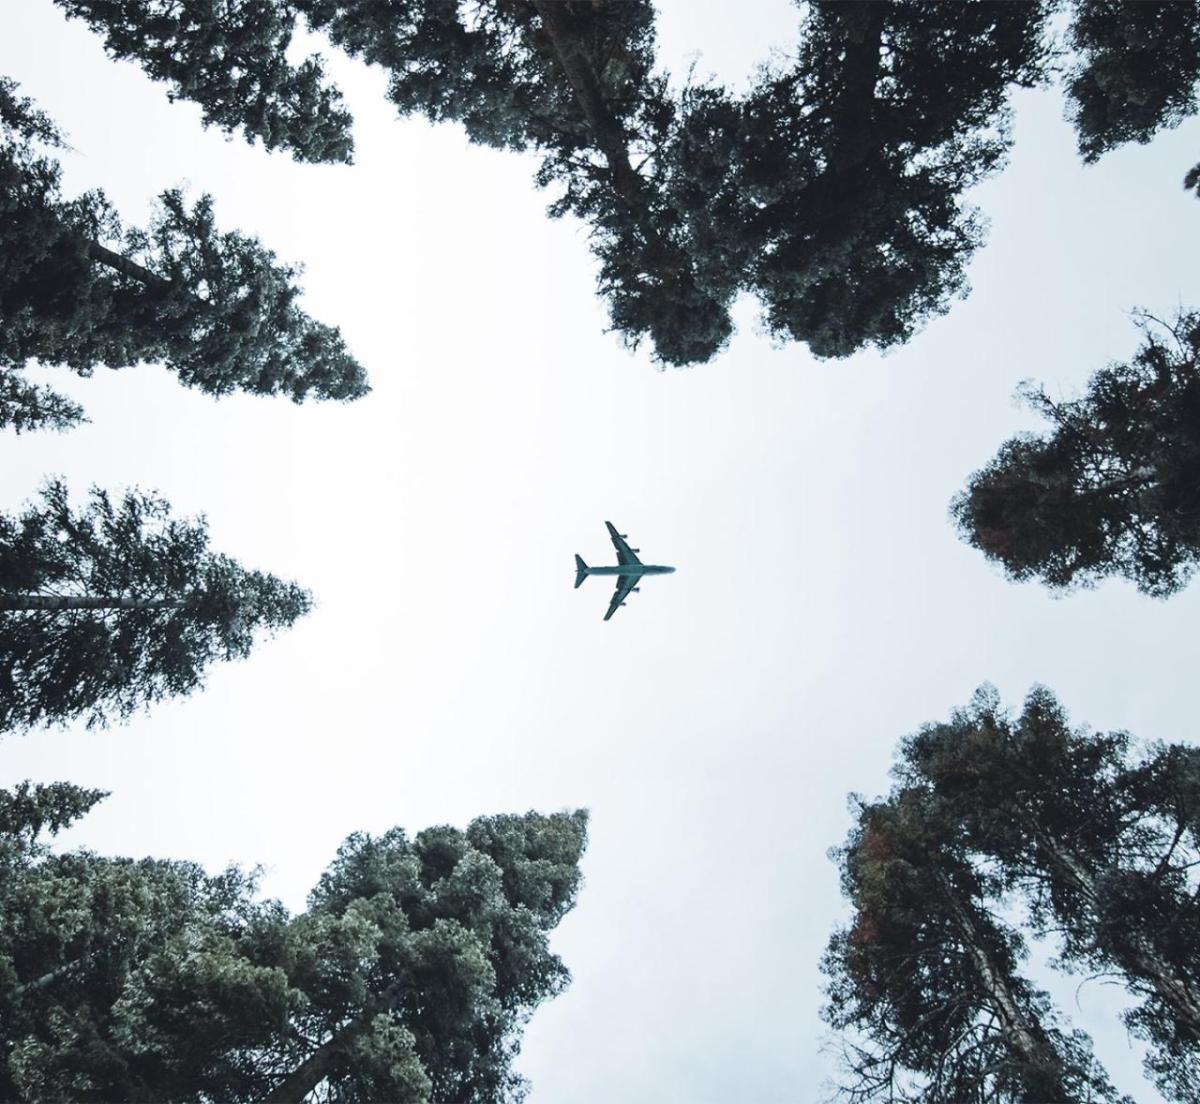 Photo of airplane in the sky viewed through trees